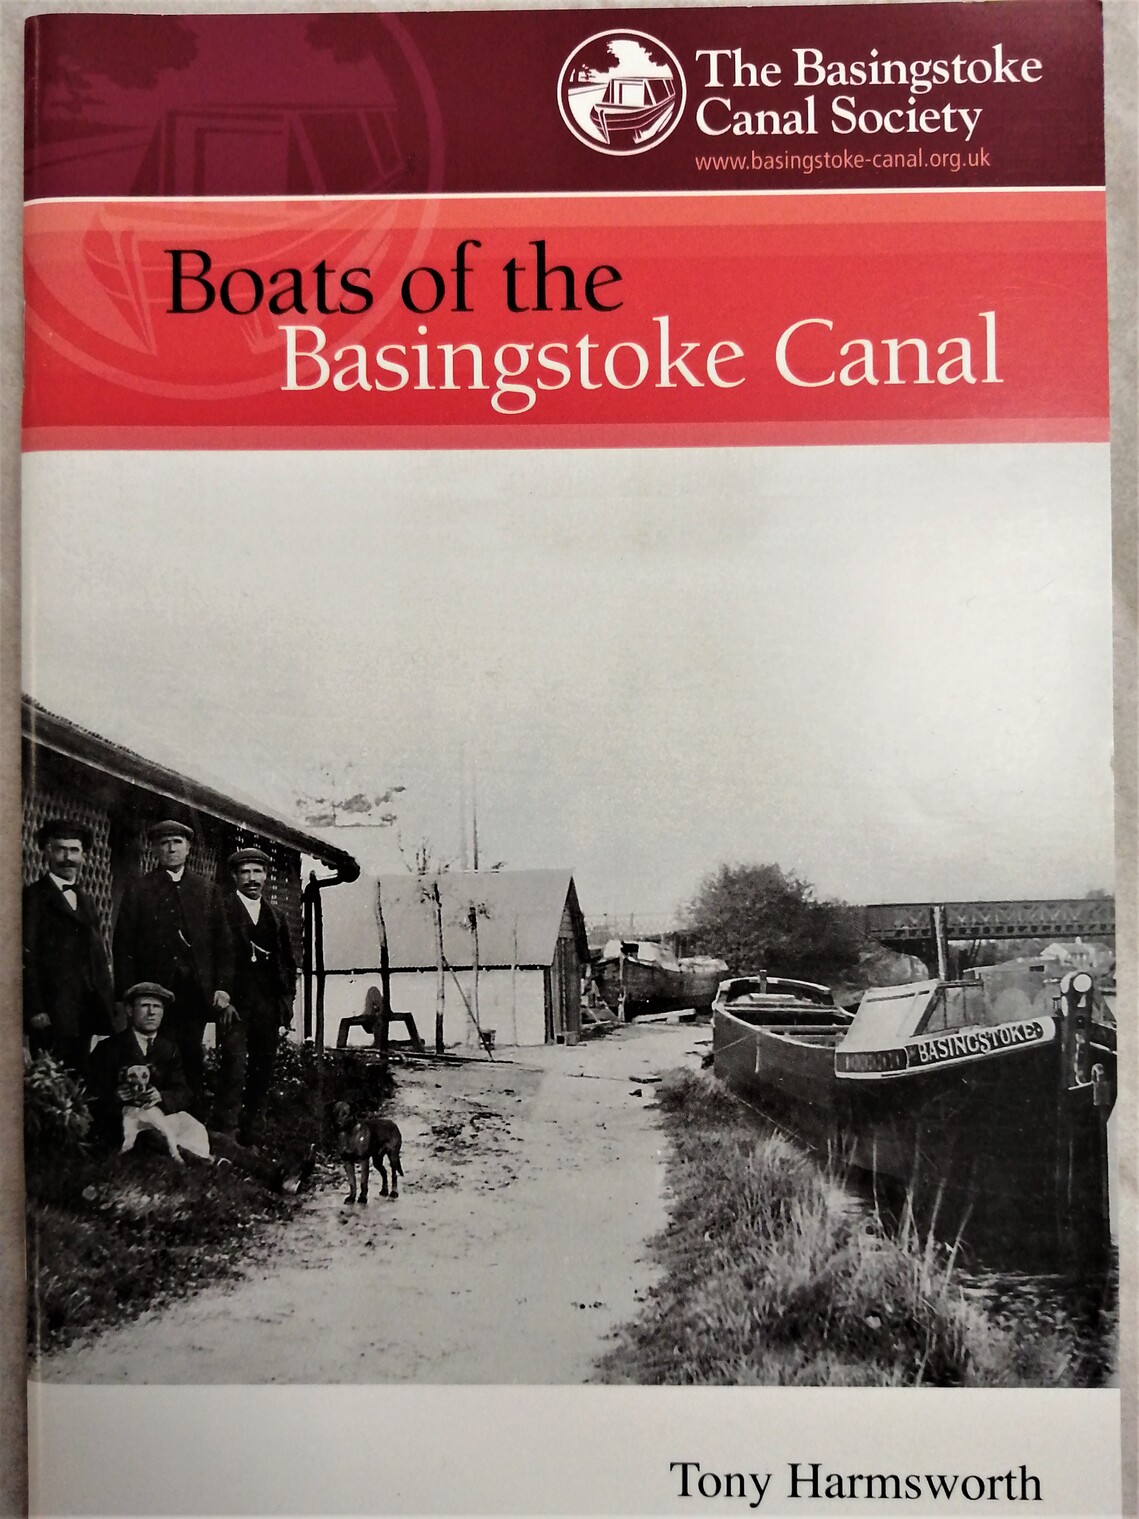 BOATS OF THE BASINGSTOKE CANAL